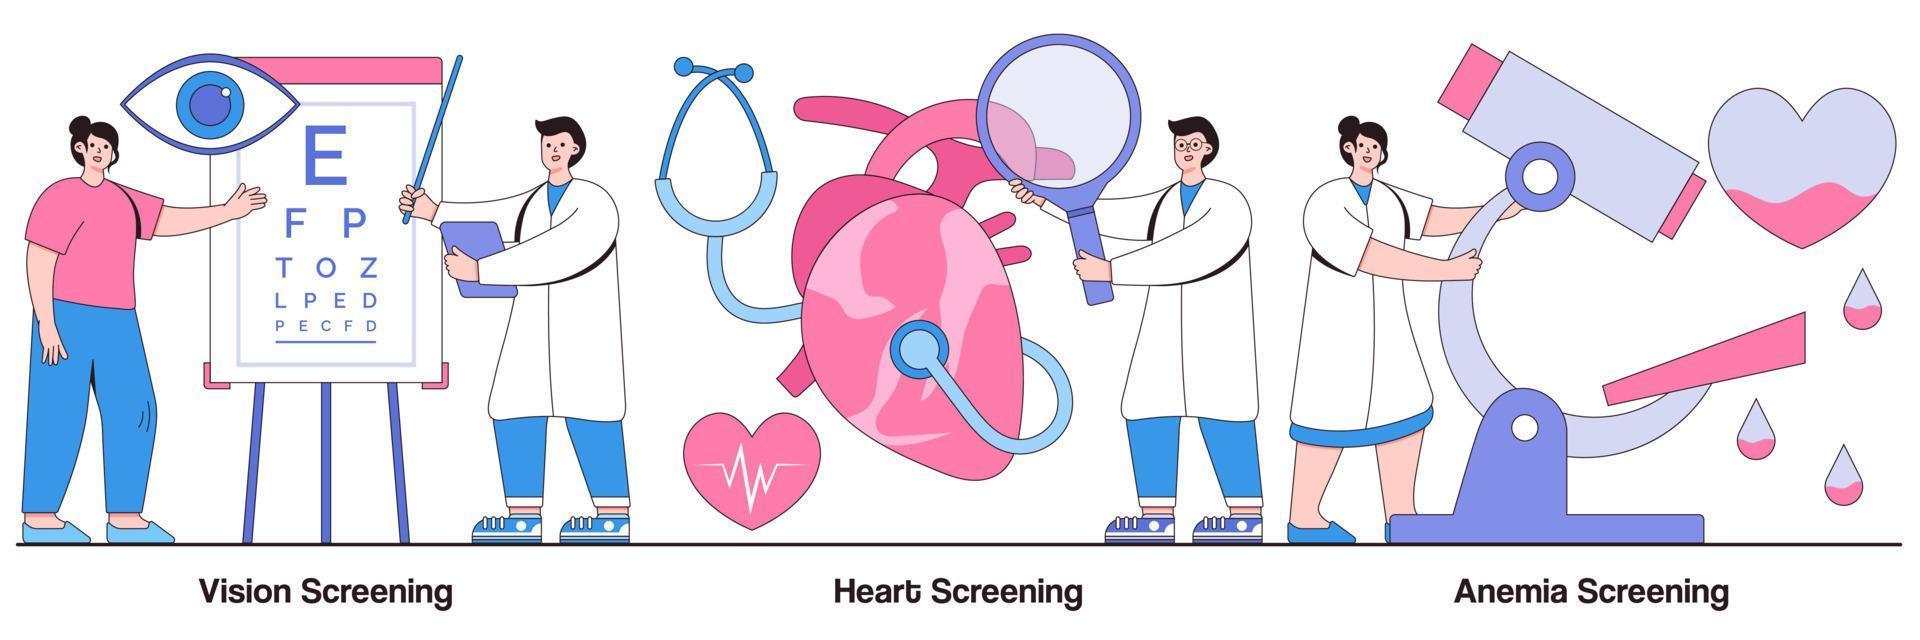 Vision, Heart, and Anemia Screening Illustrated Pack vector